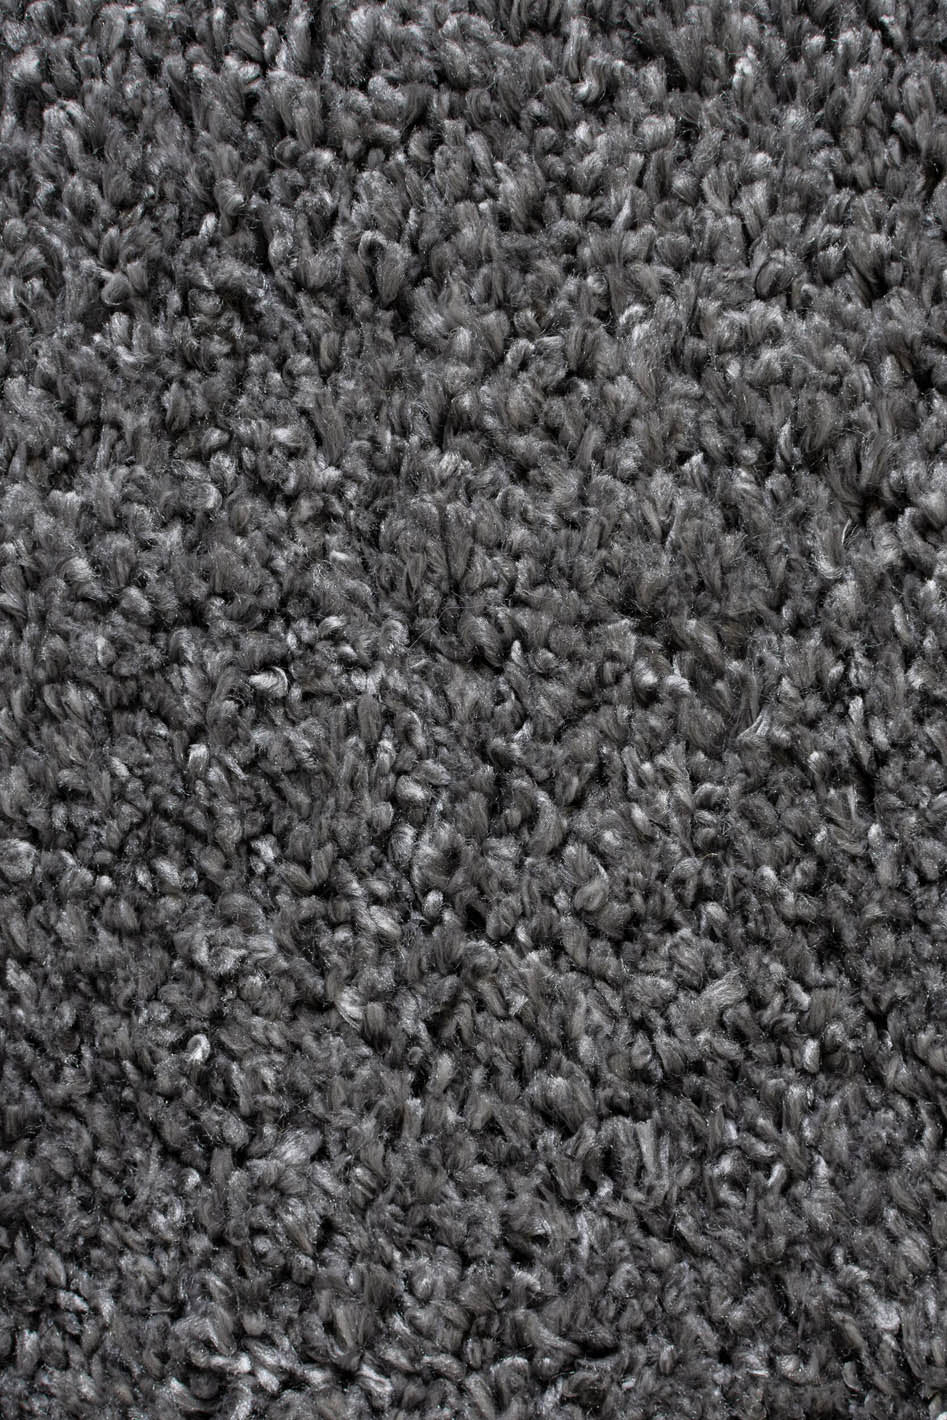 Tapis Shaggy Anthracite